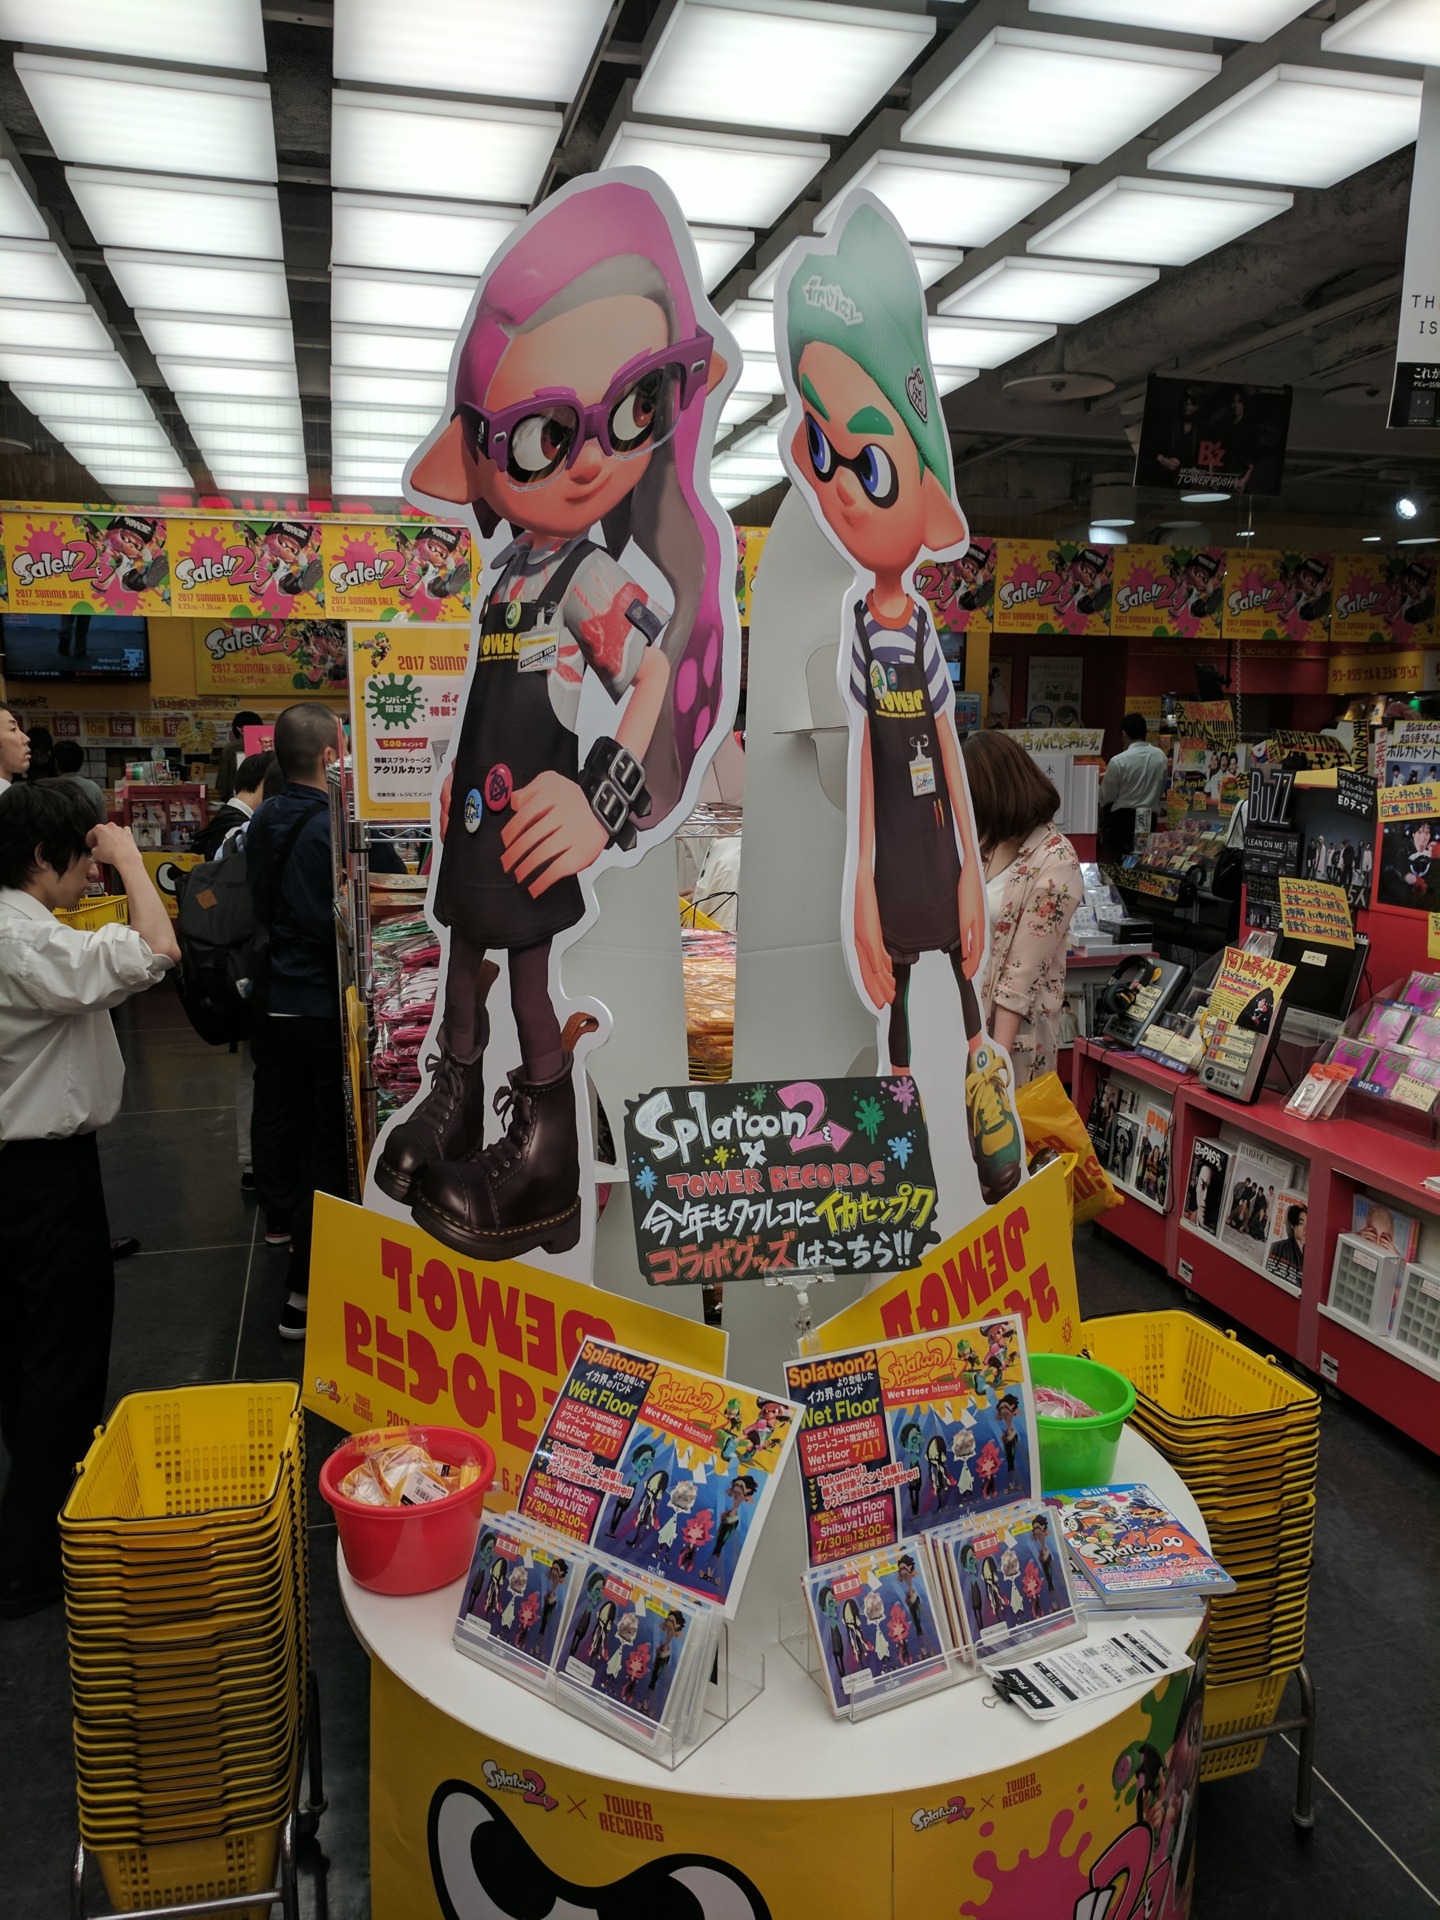 Inkling boy and girl with merch